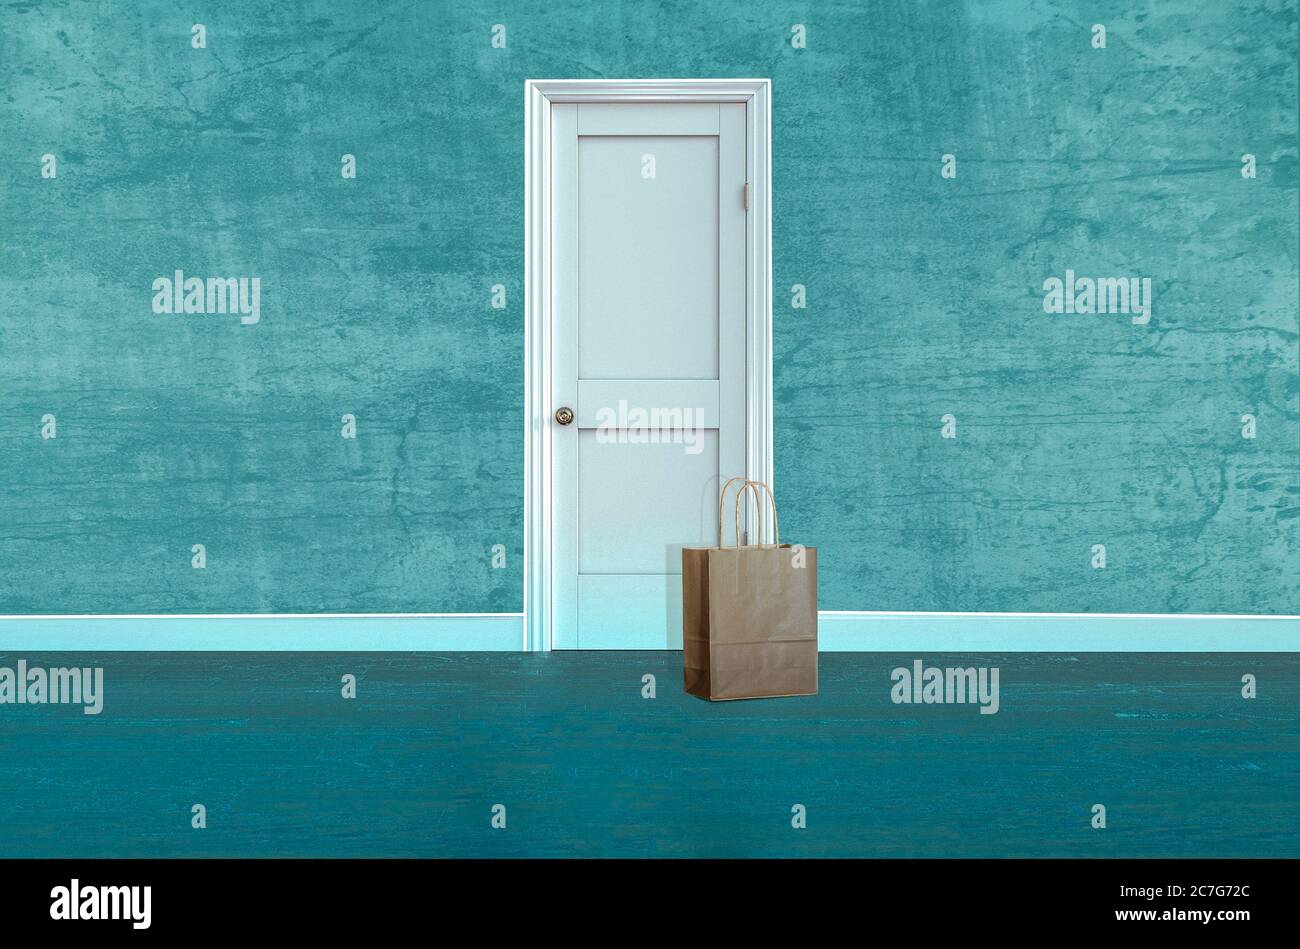 Food or goods delivery in paper bag in front of the door. Stock Photo